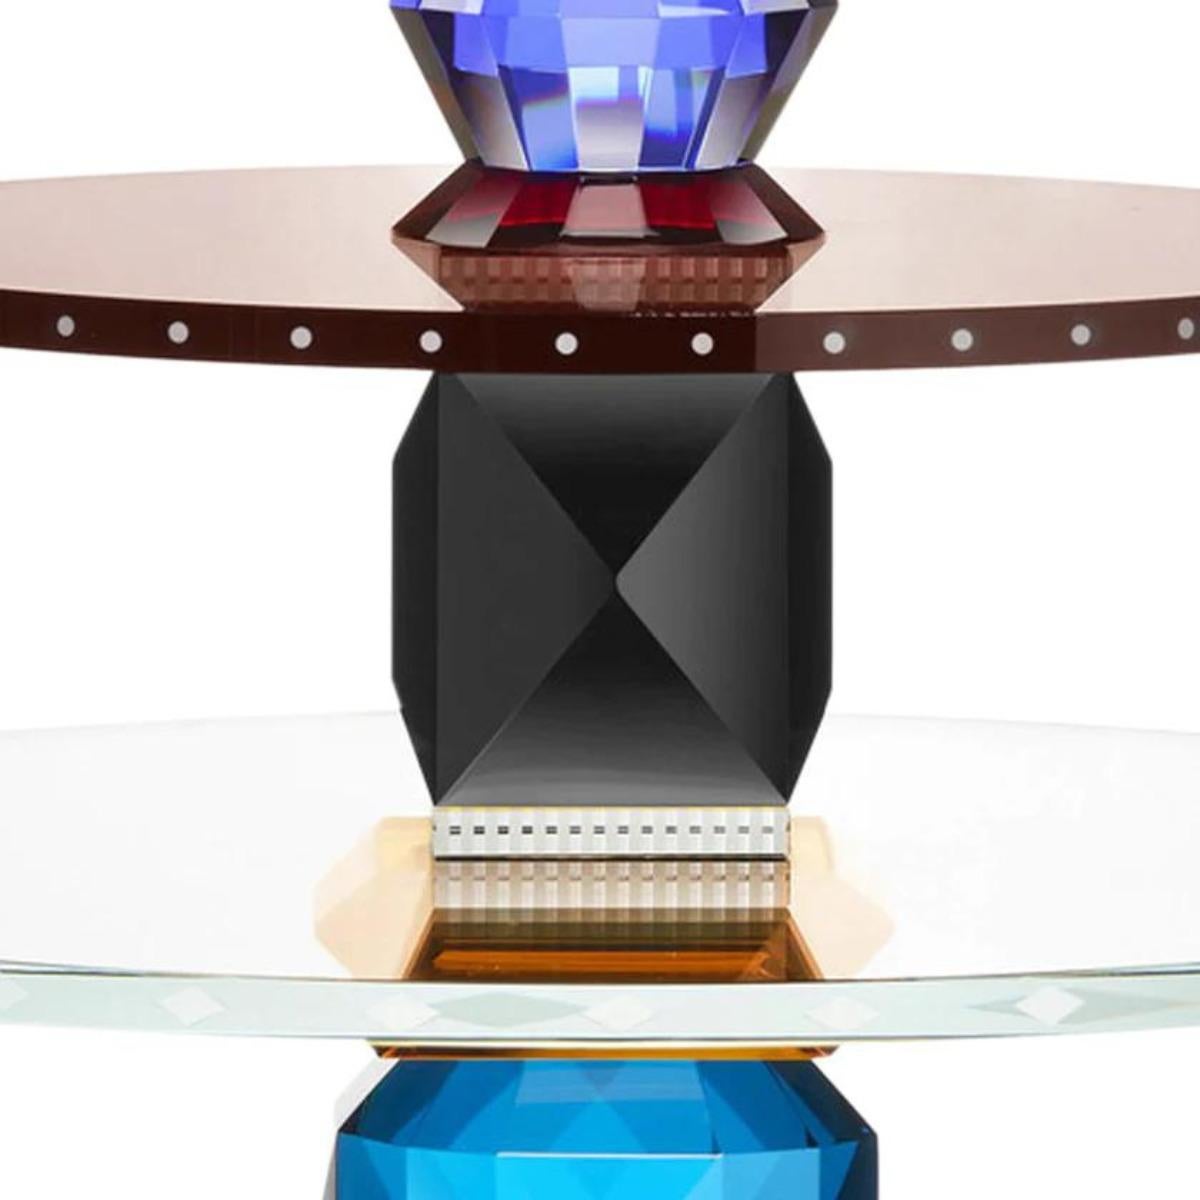 Three-tiered circular crystal tray, OMA model, 21st century.

Coloured circular tray with three levels. A well-chosen tray not only provides functionality, but also adds a layer of visual interest, creating a balanced composition that complements